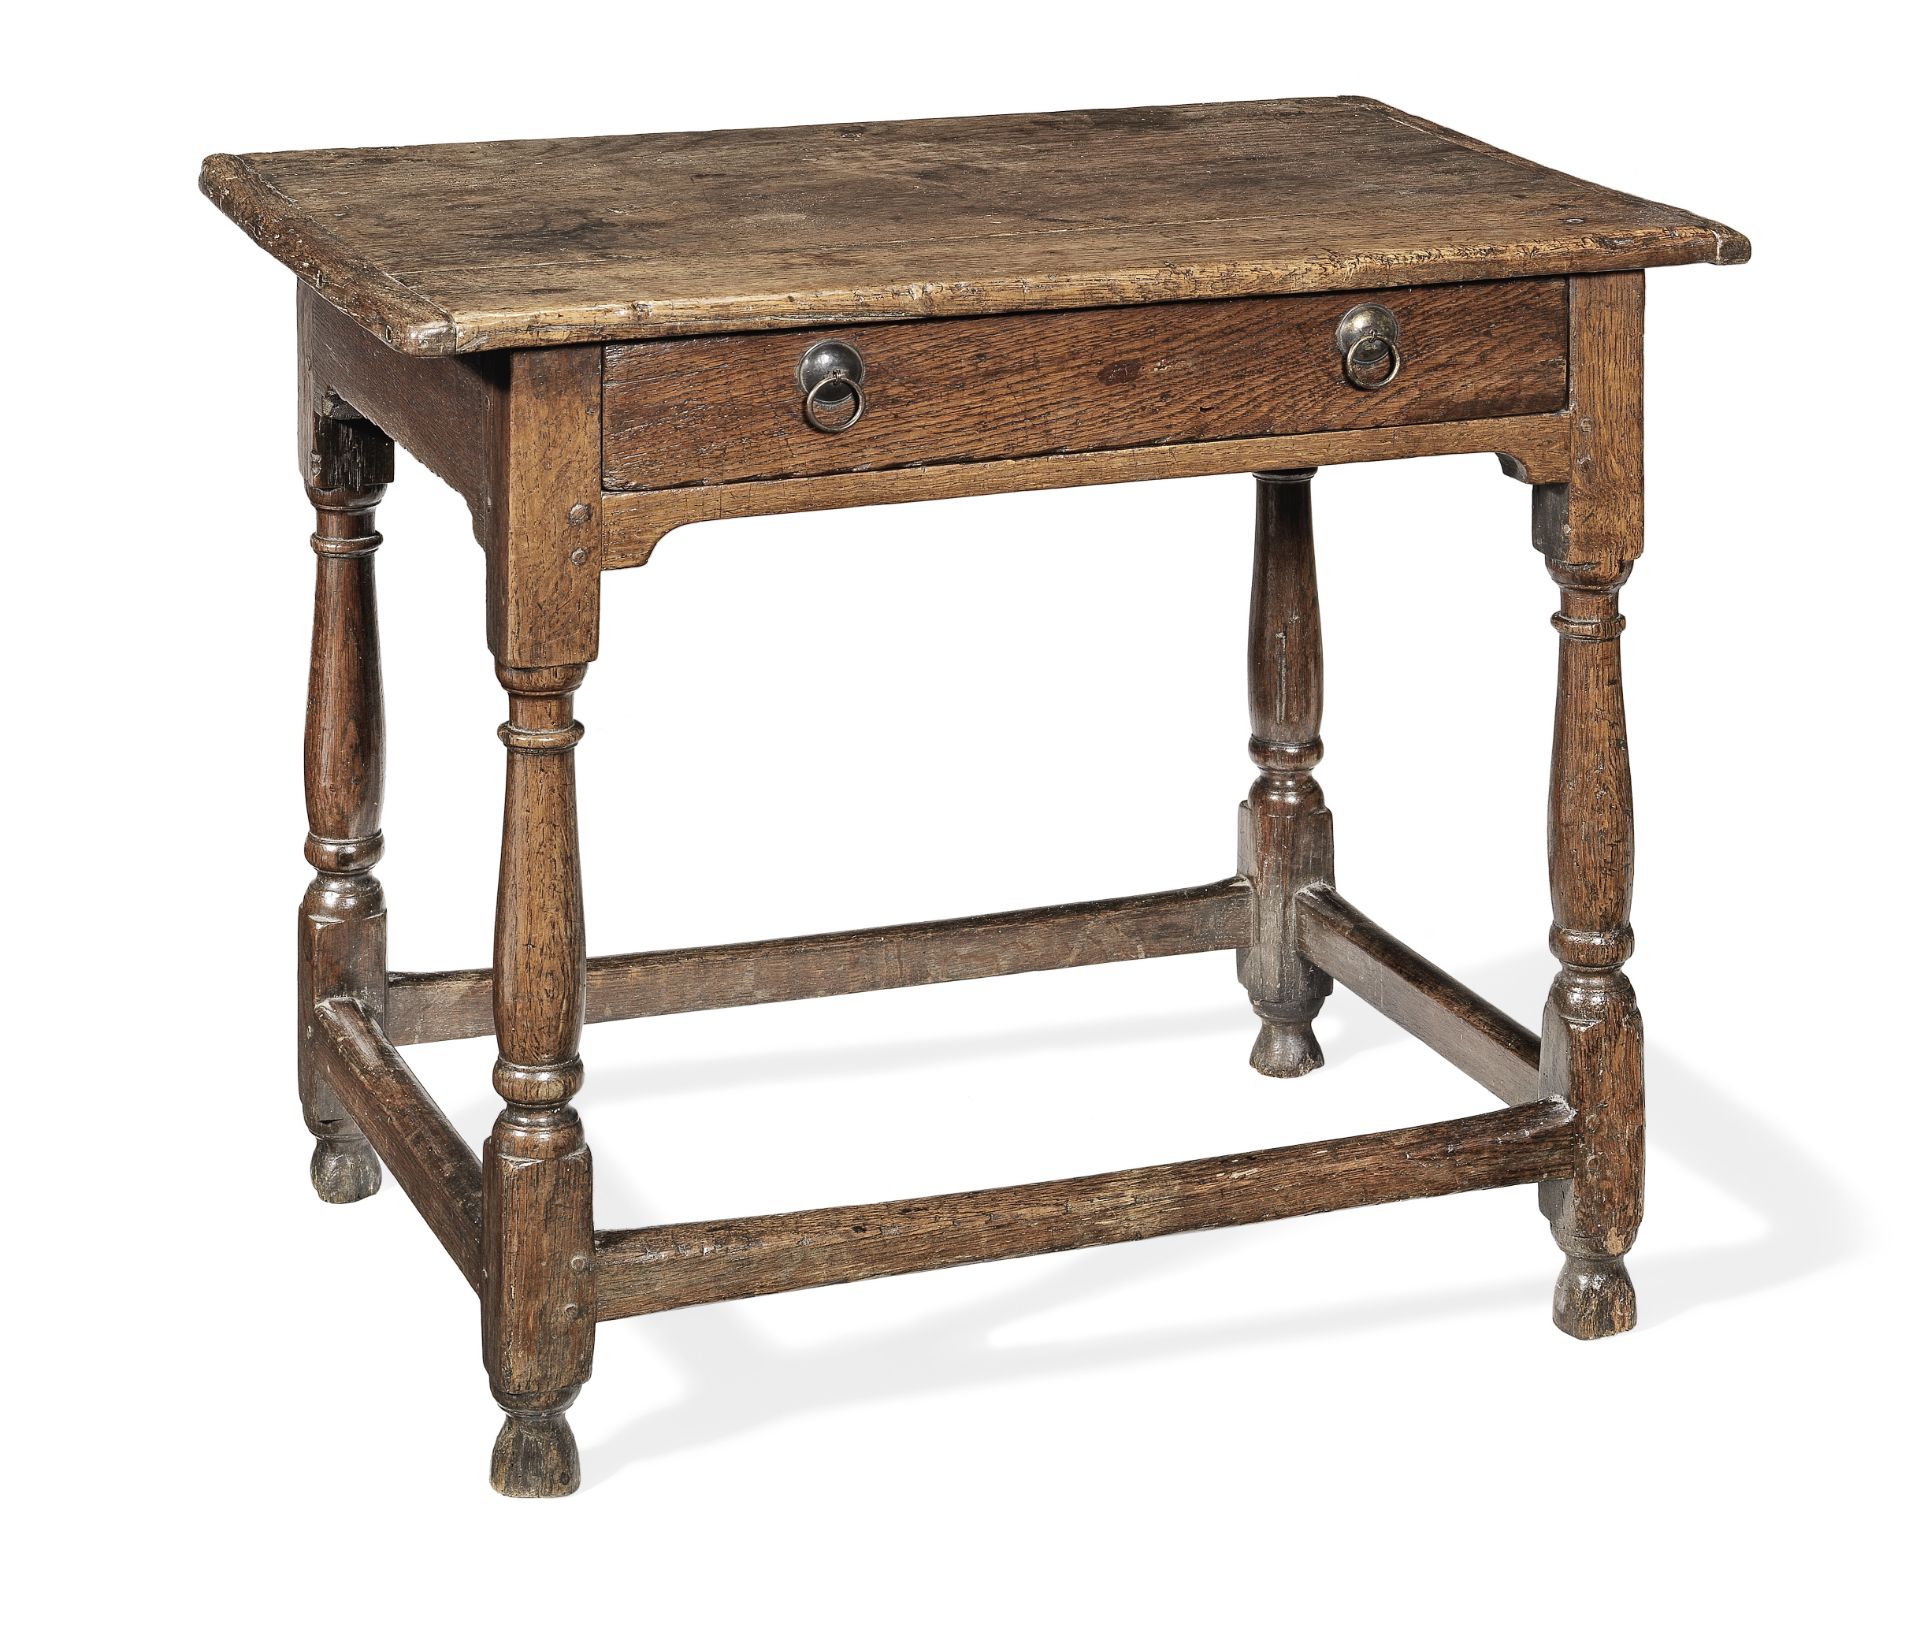 A particularly small George I oak side table, possibly for a child, circa 1720